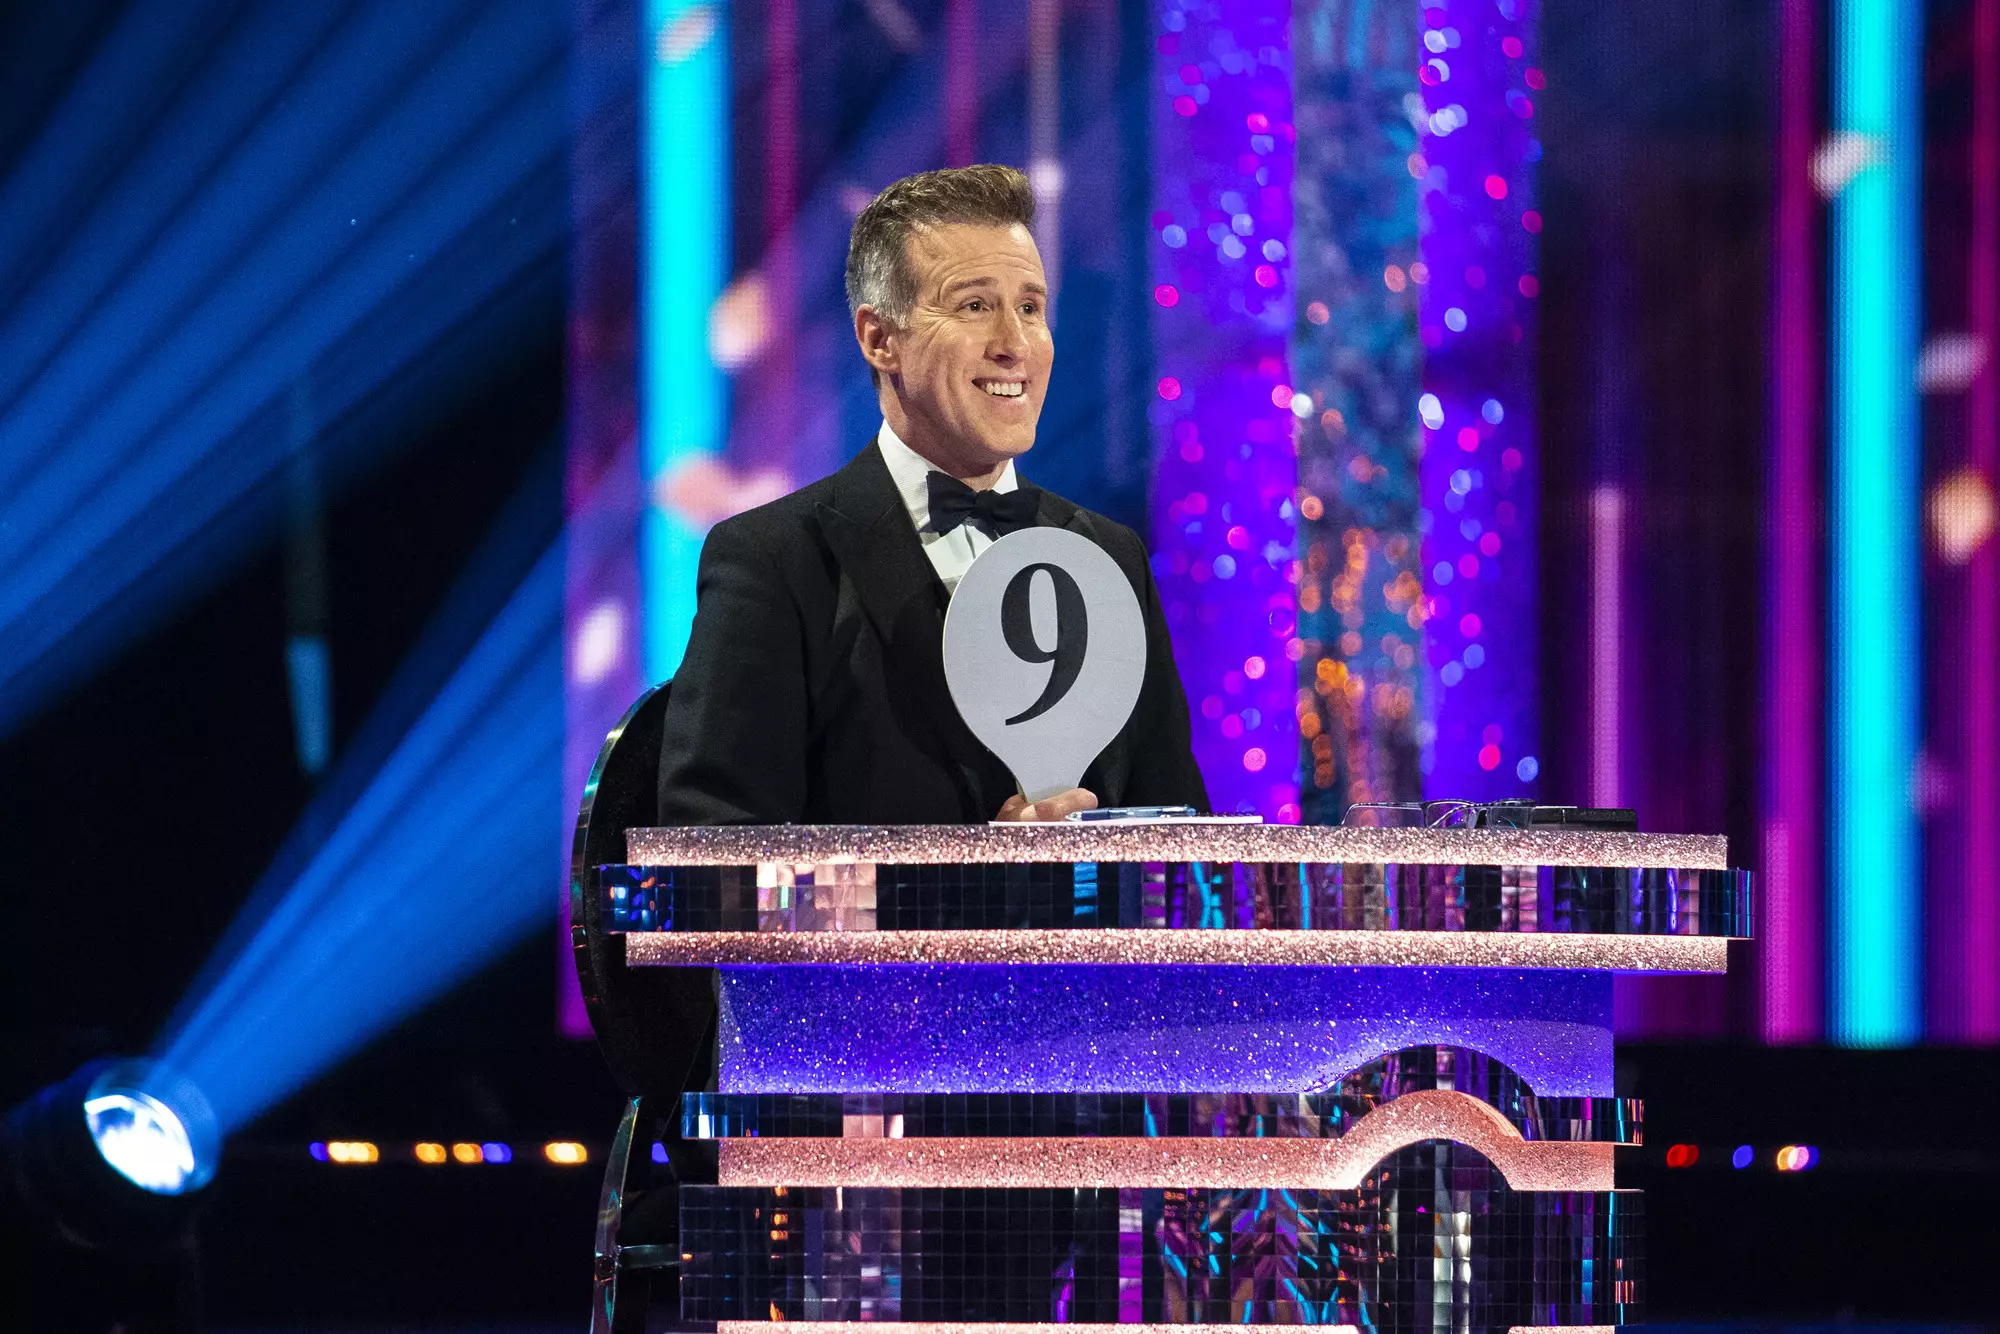 Anton du Beke made his debut on the judging panel and fans loved it (